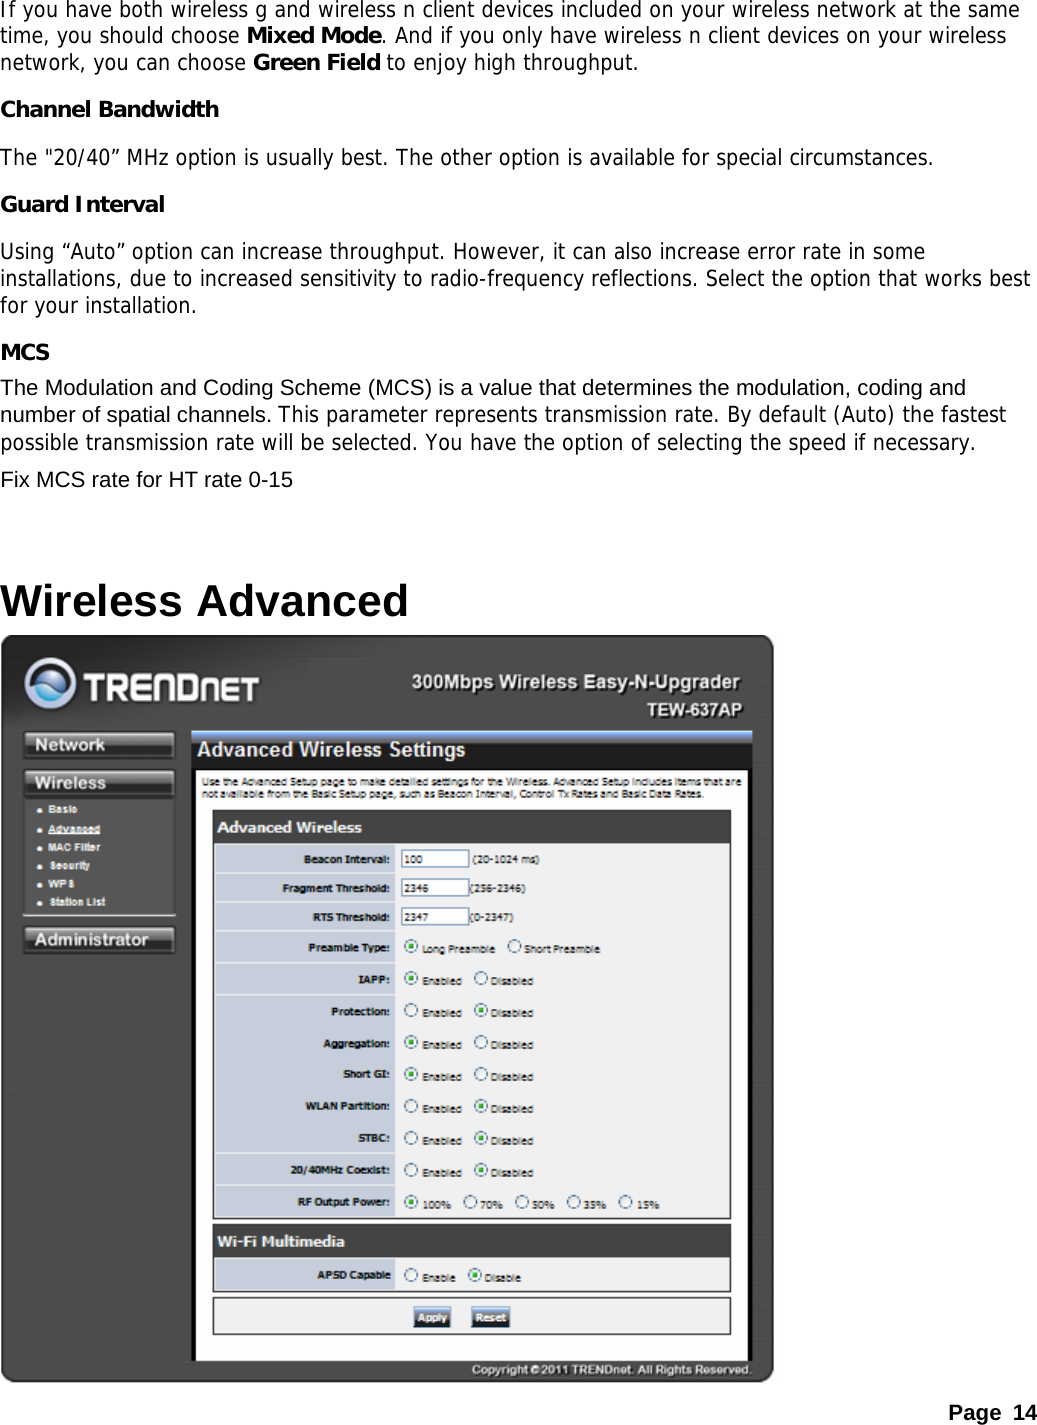 Page 14 If you have both wireless g and wireless n client devices included on your wireless network at the same time, you should choose Mixed Mode. And if you only have wireless n client devices on your wireless network, you can choose Green Field to enjoy high throughput. Channel Bandwidth The &quot;20/40” MHz option is usually best. The other option is available for special circumstances.  Guard Interval Using “Auto” option can increase throughput. However, it can also increase error rate in some installations, due to increased sensitivity to radio-frequency reflections. Select the option that works best for your installation.   MCS The Modulation and Coding Scheme (MCS) is a value that determines the modulation, coding and number of spatial channels. This parameter represents transmission rate. By default (Auto) the fastest possible transmission rate will be selected. You have the option of selecting the speed if necessary.  Fix MCS rate for HT rate 0-15  Wireless Advanced  